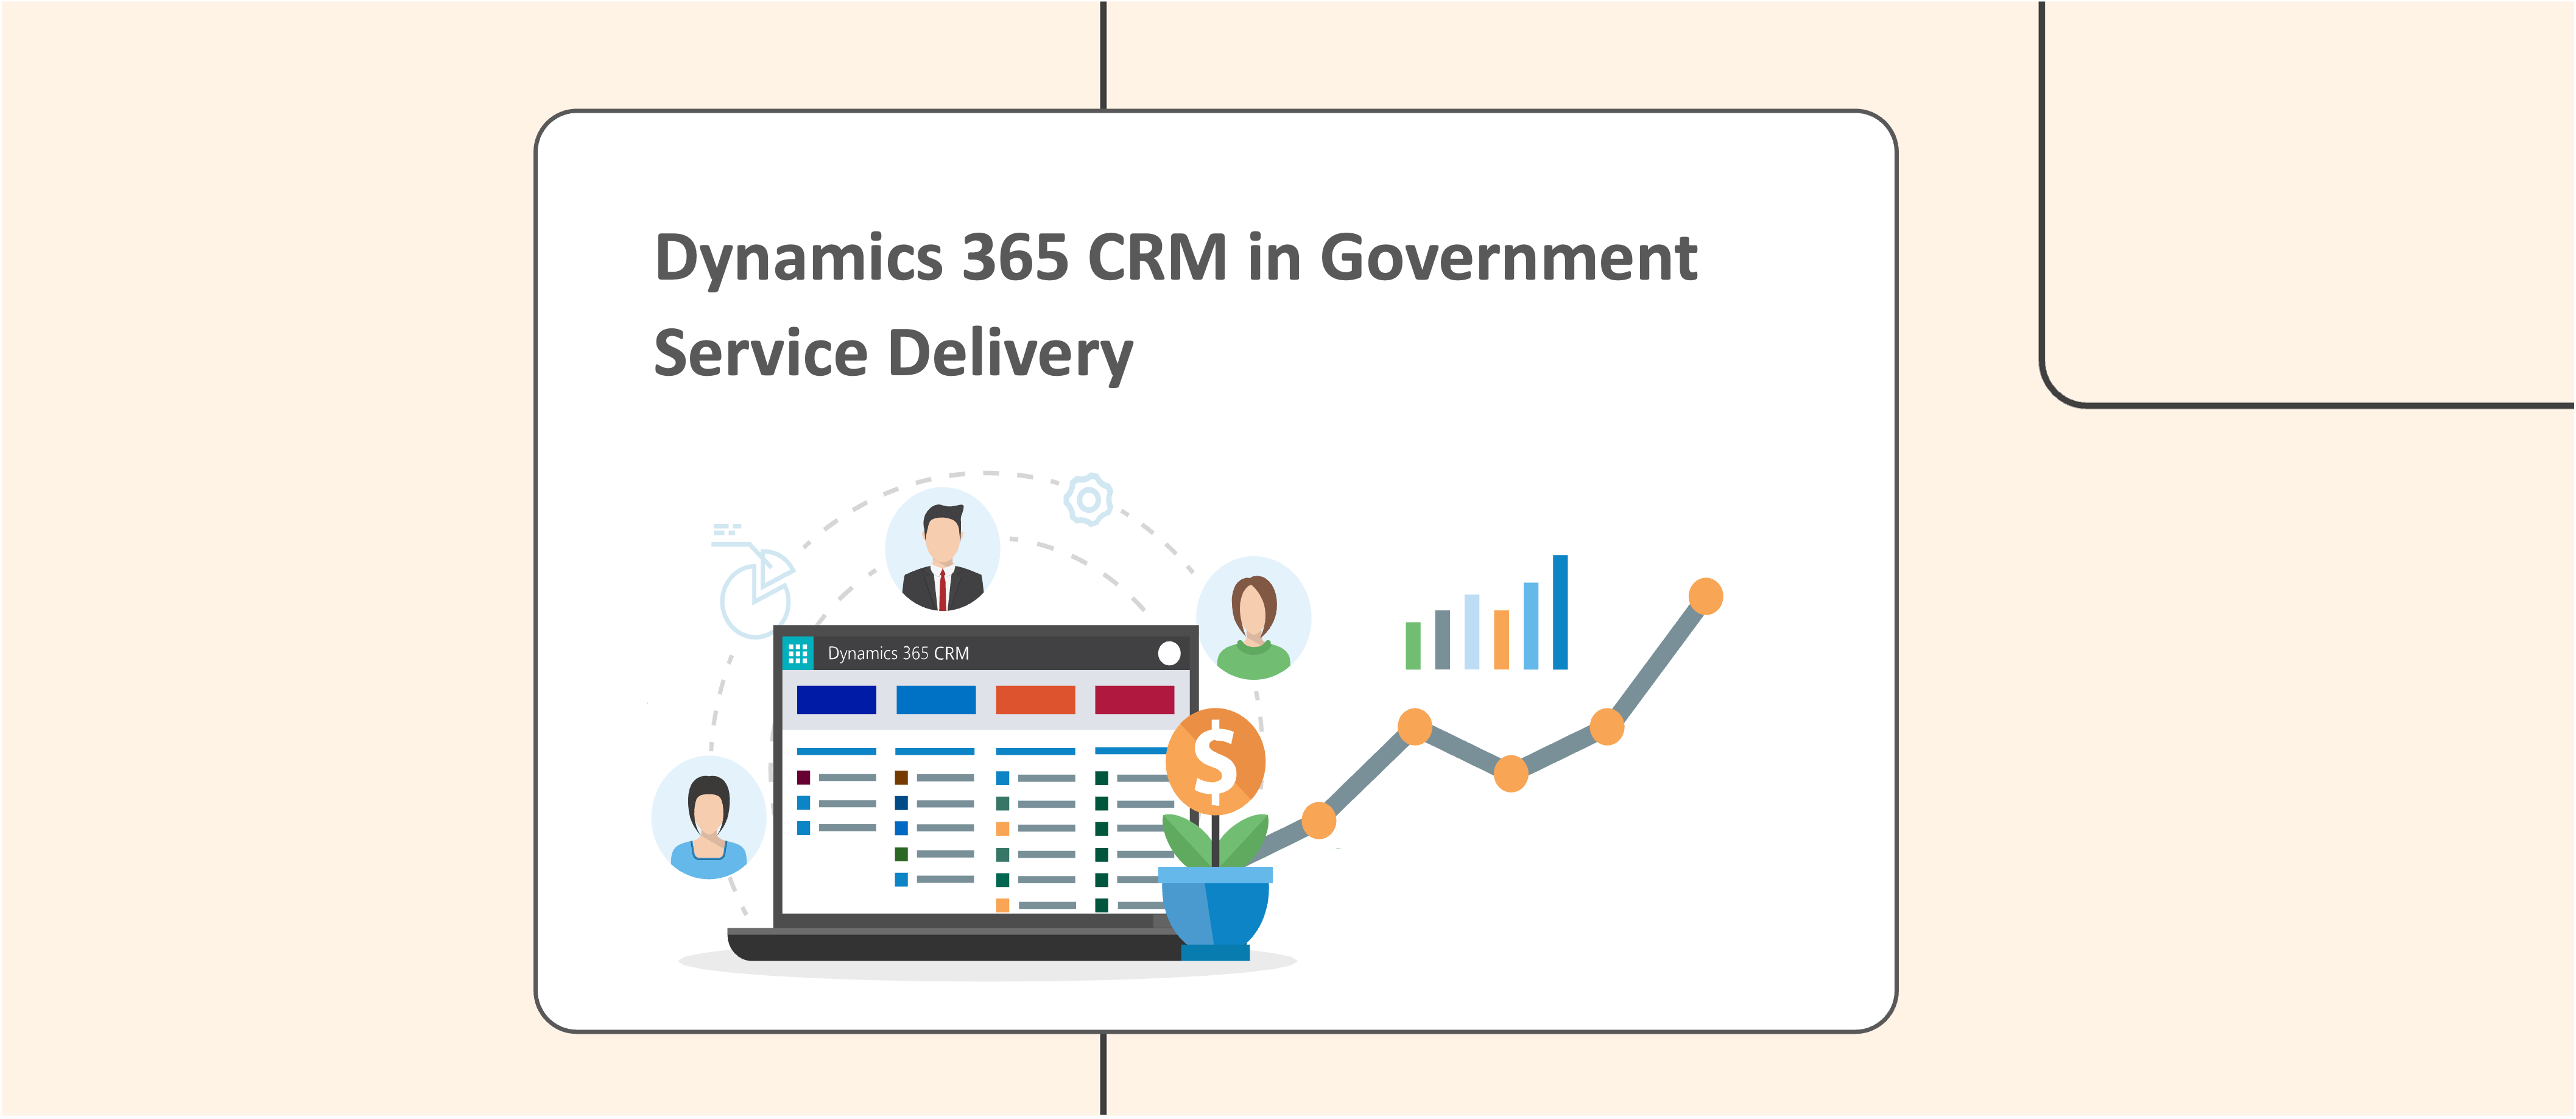 How Dynamics 365 CRM is Transforming Government Service Delivery